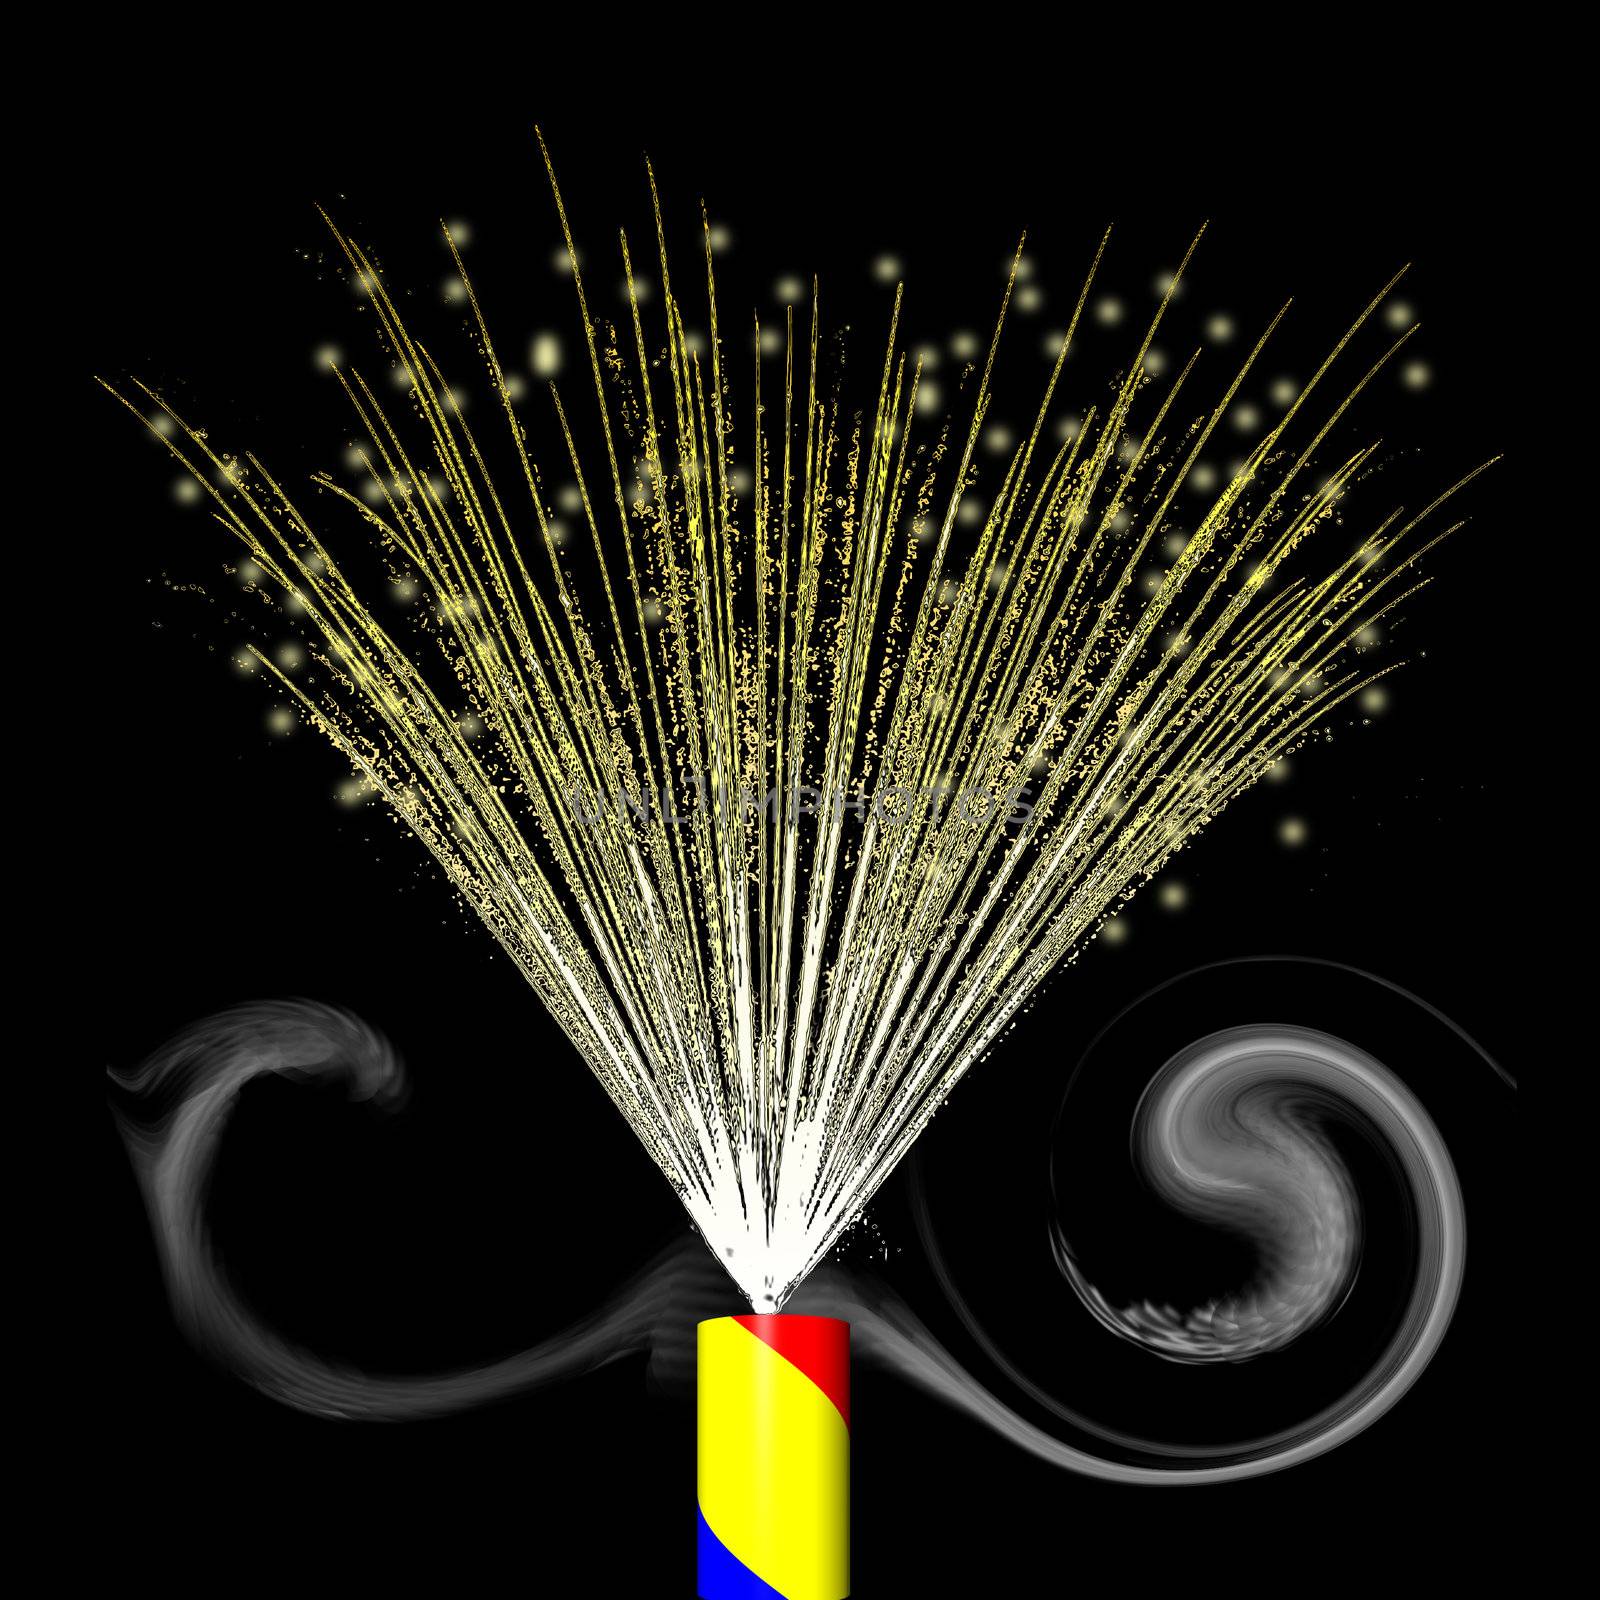 A firework streamer exploding in a golden color display.